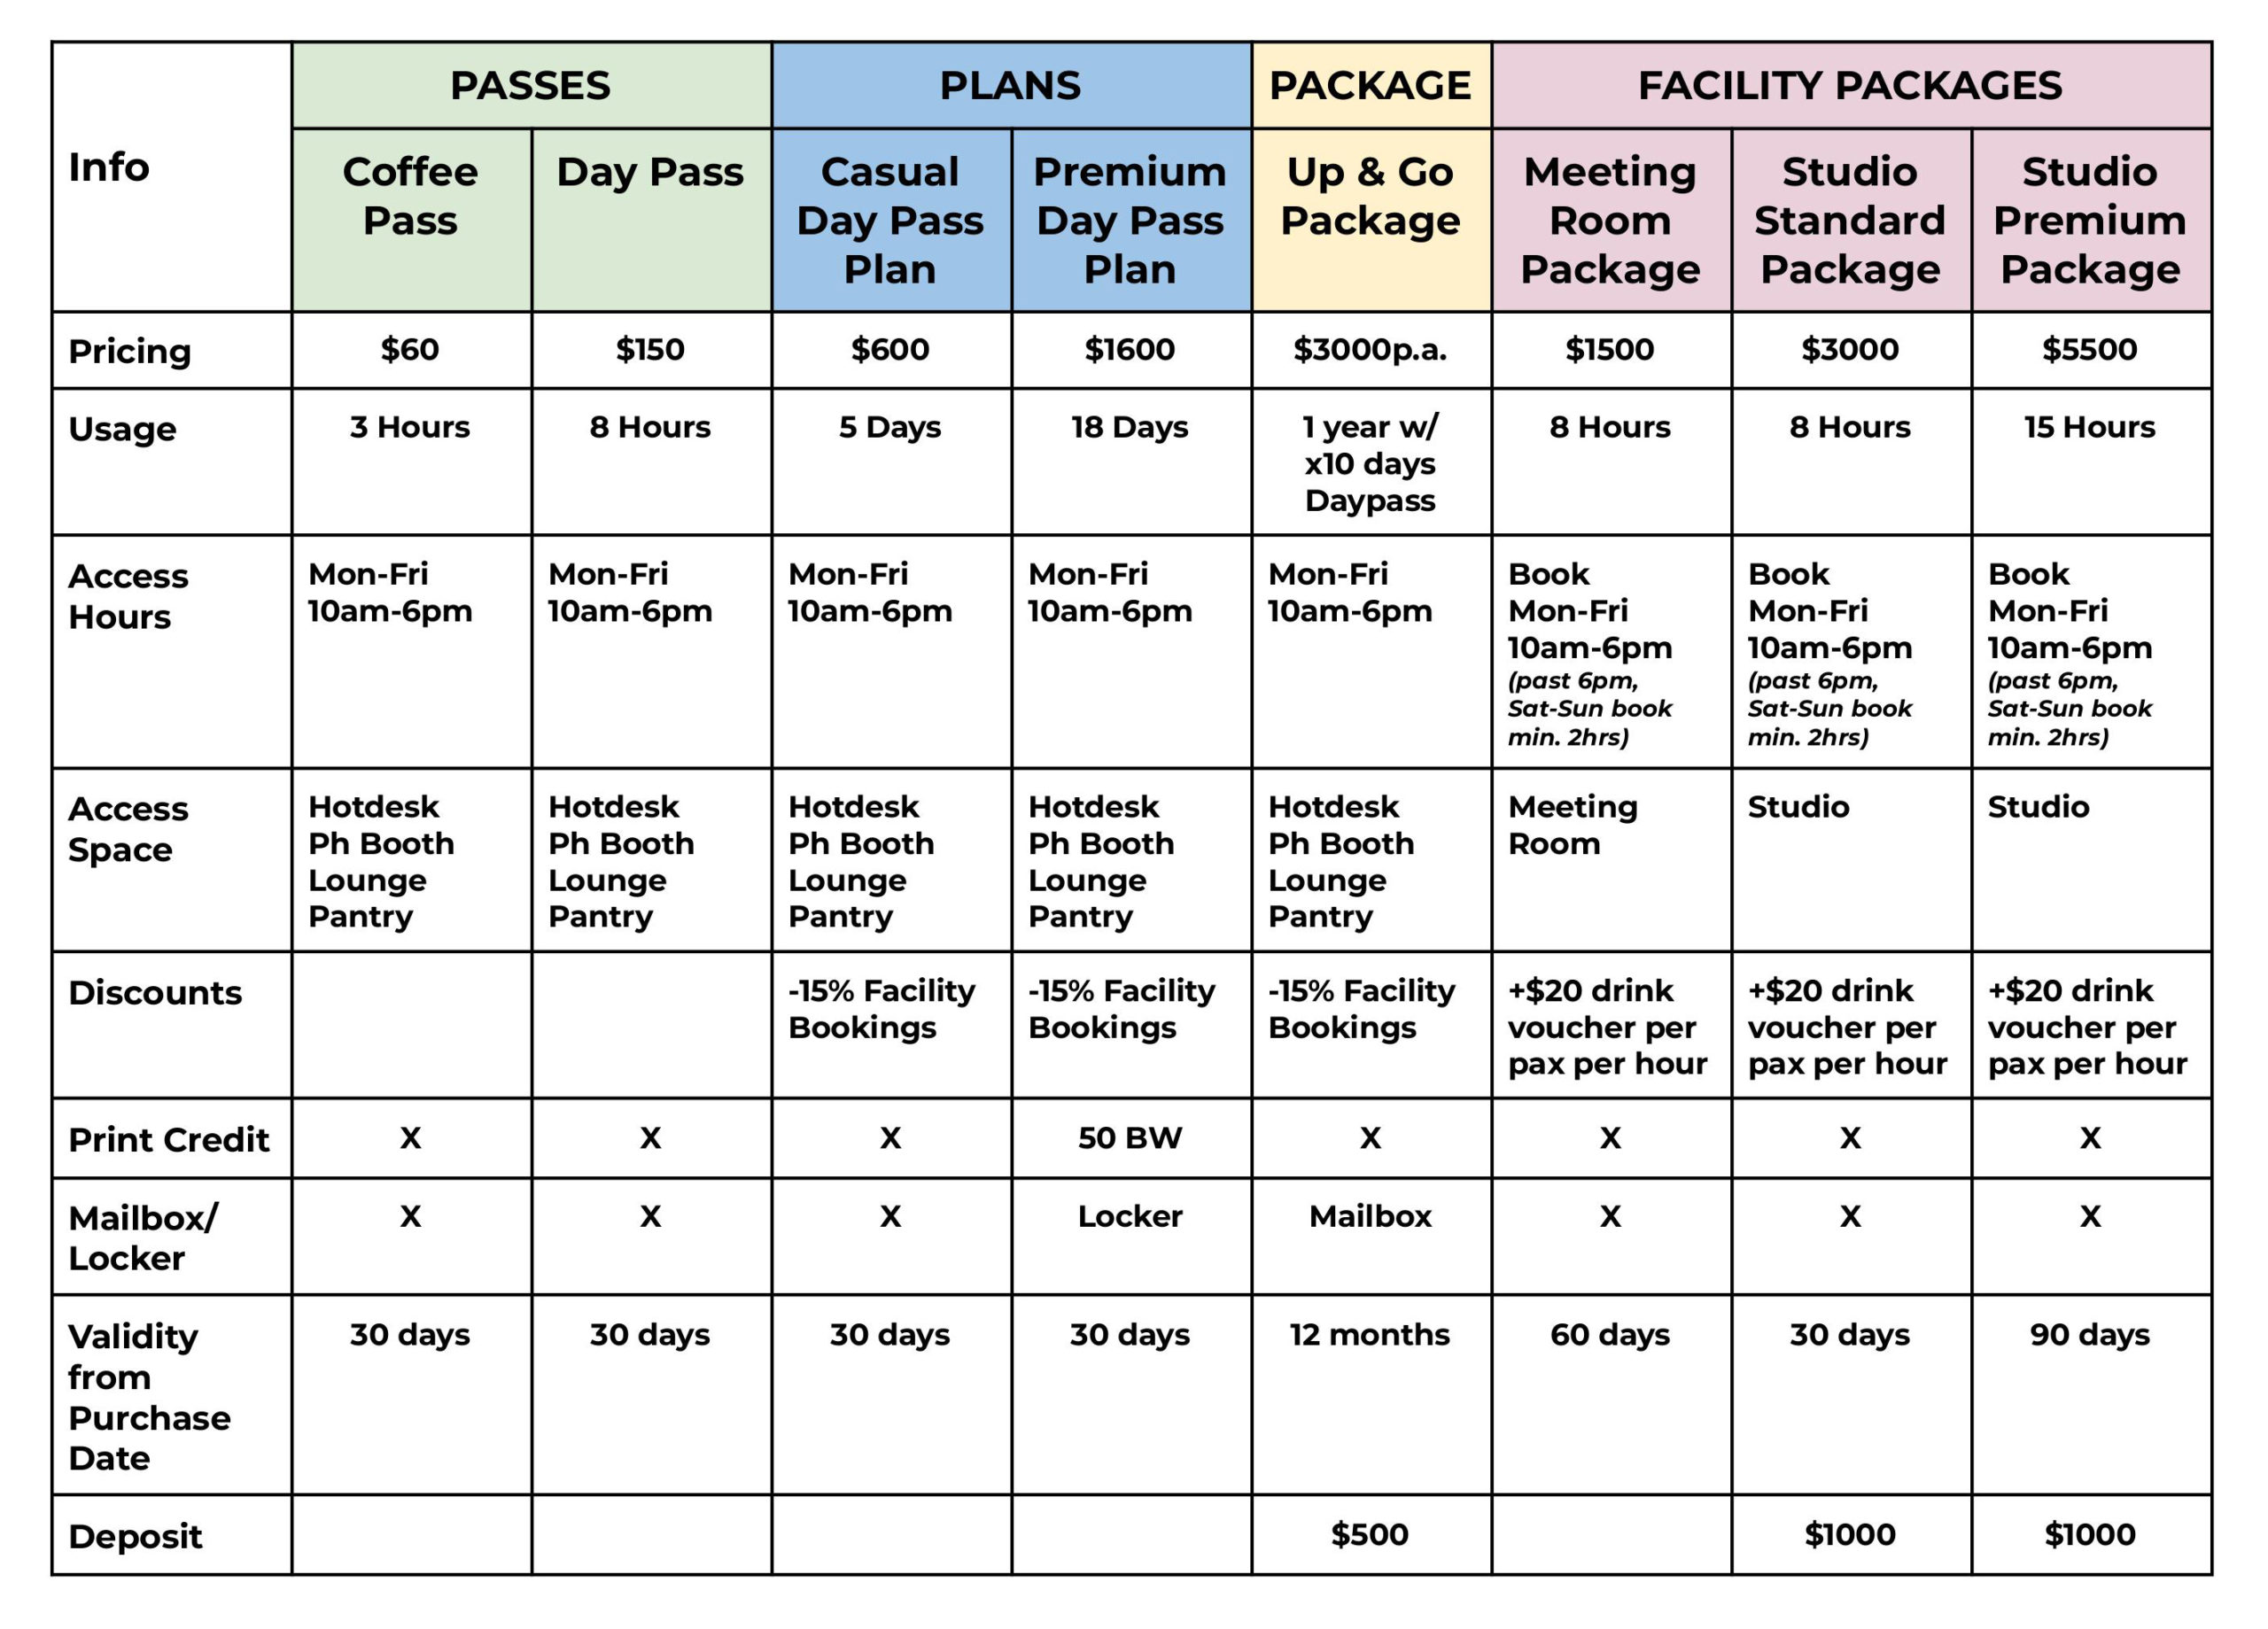 amphi plans and packages table